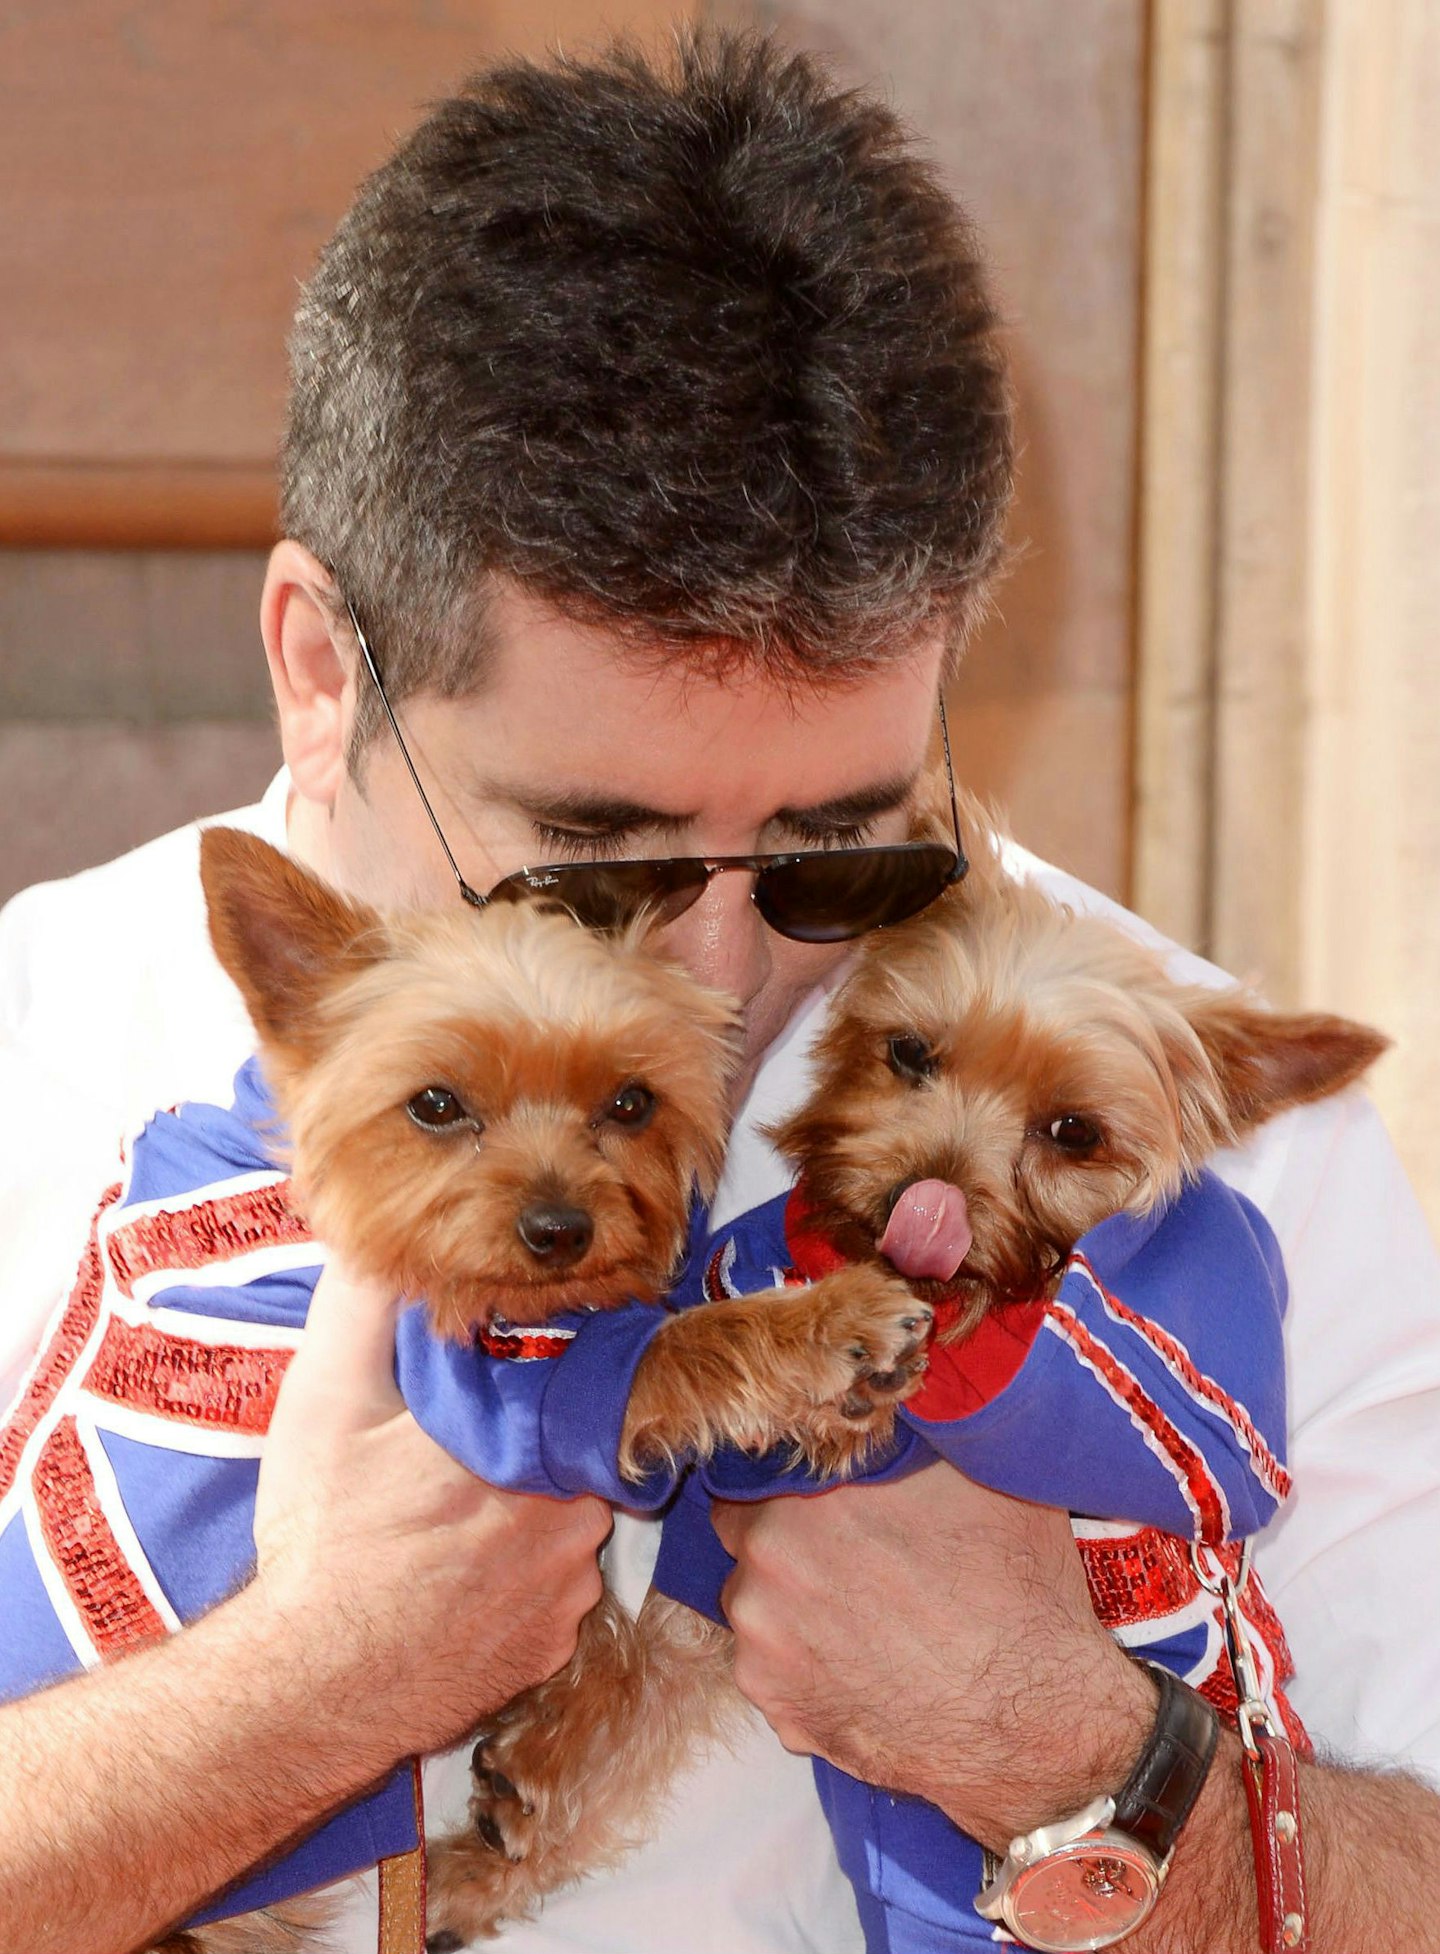 Simon and his beloved pooches.